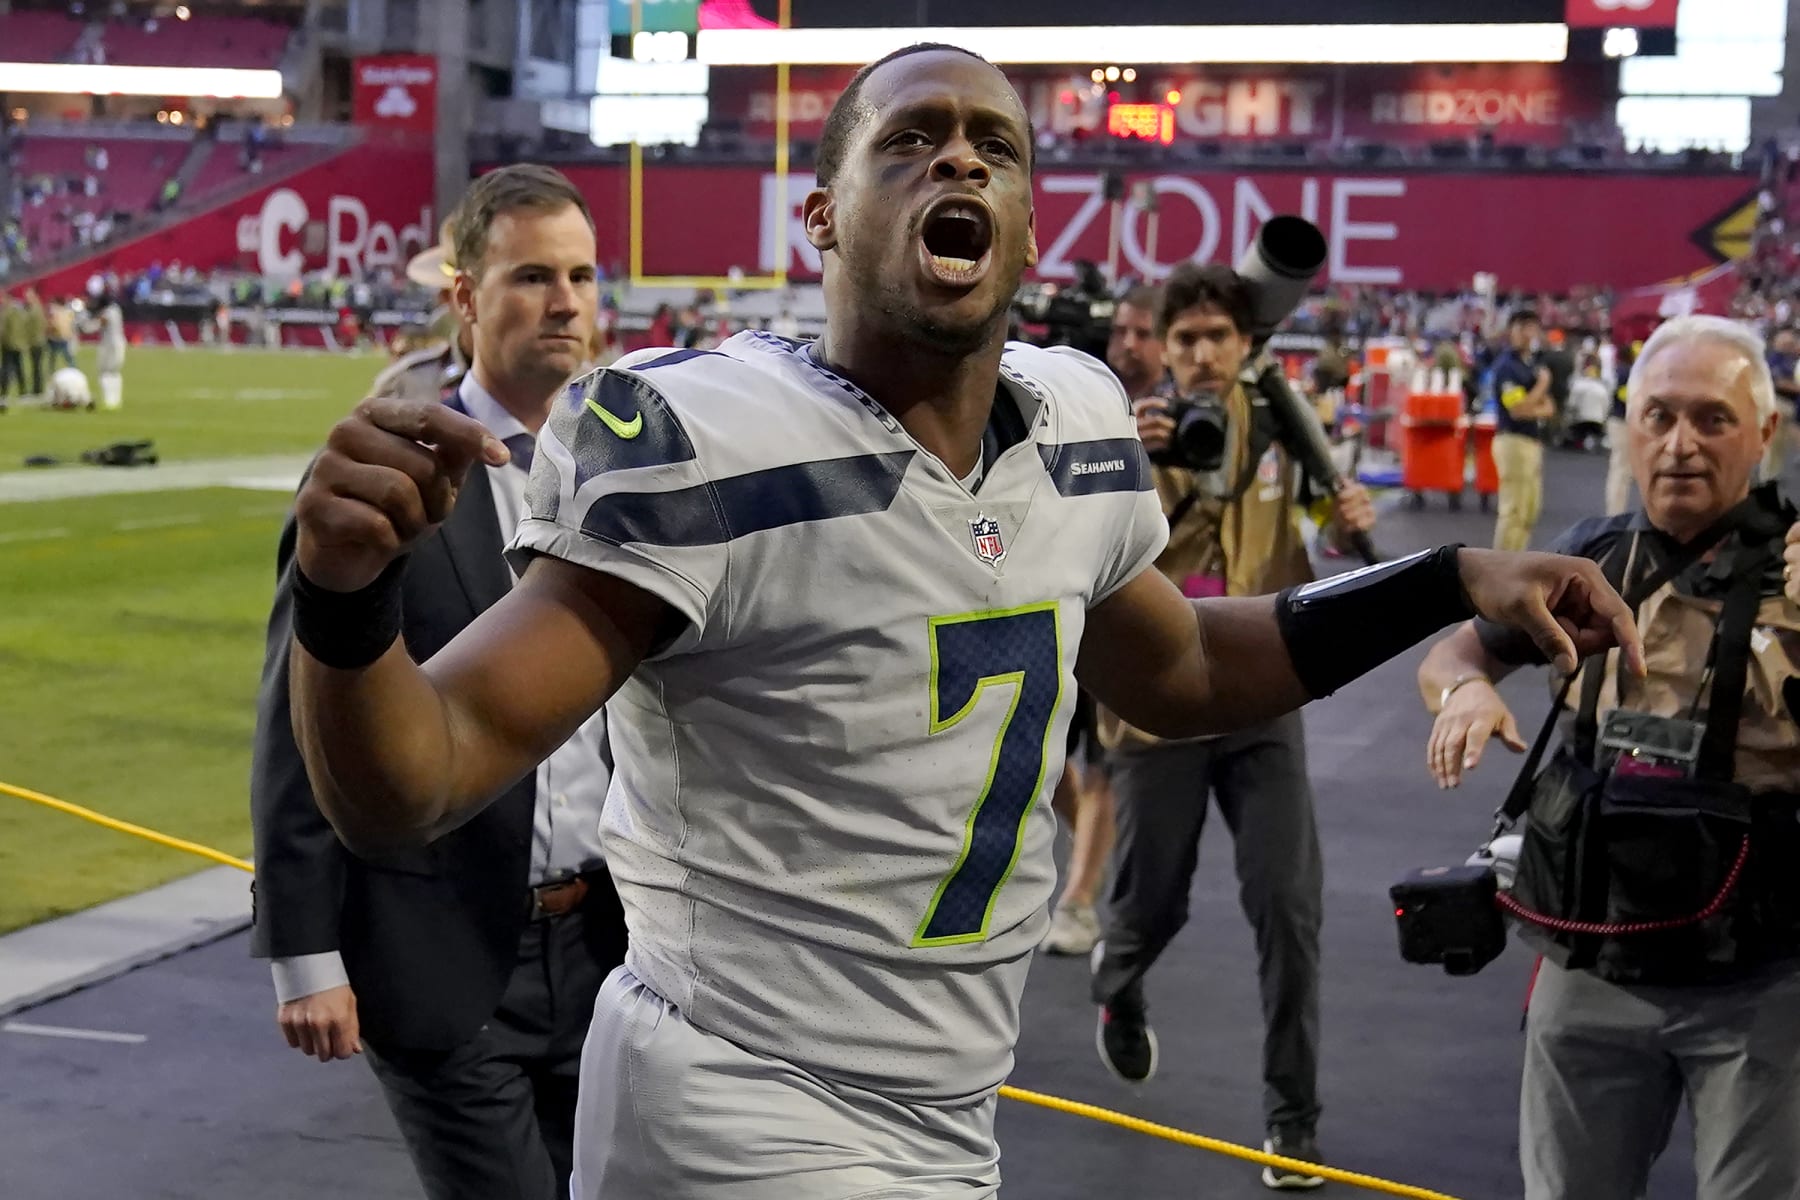 Seahawks QB Geno Smith agrees to 3-year, $105 million extension instead of  hitting free agency